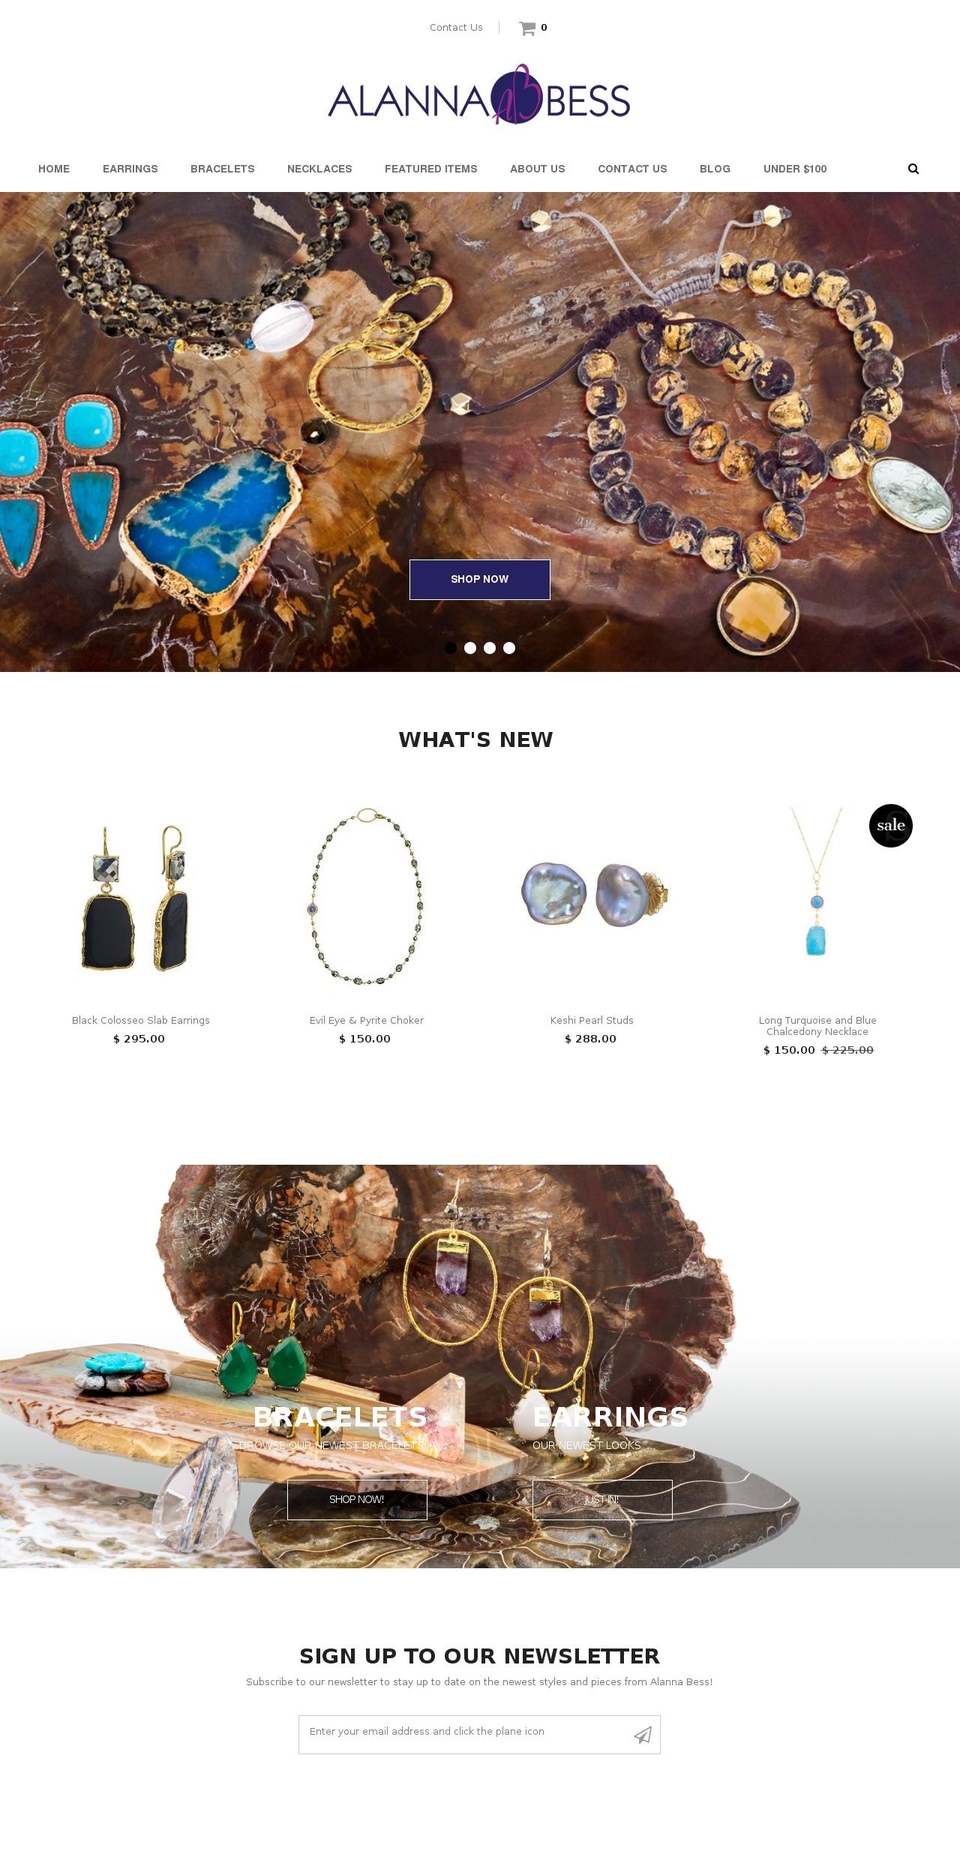 WATCHES Shopify theme site example alannabess.com